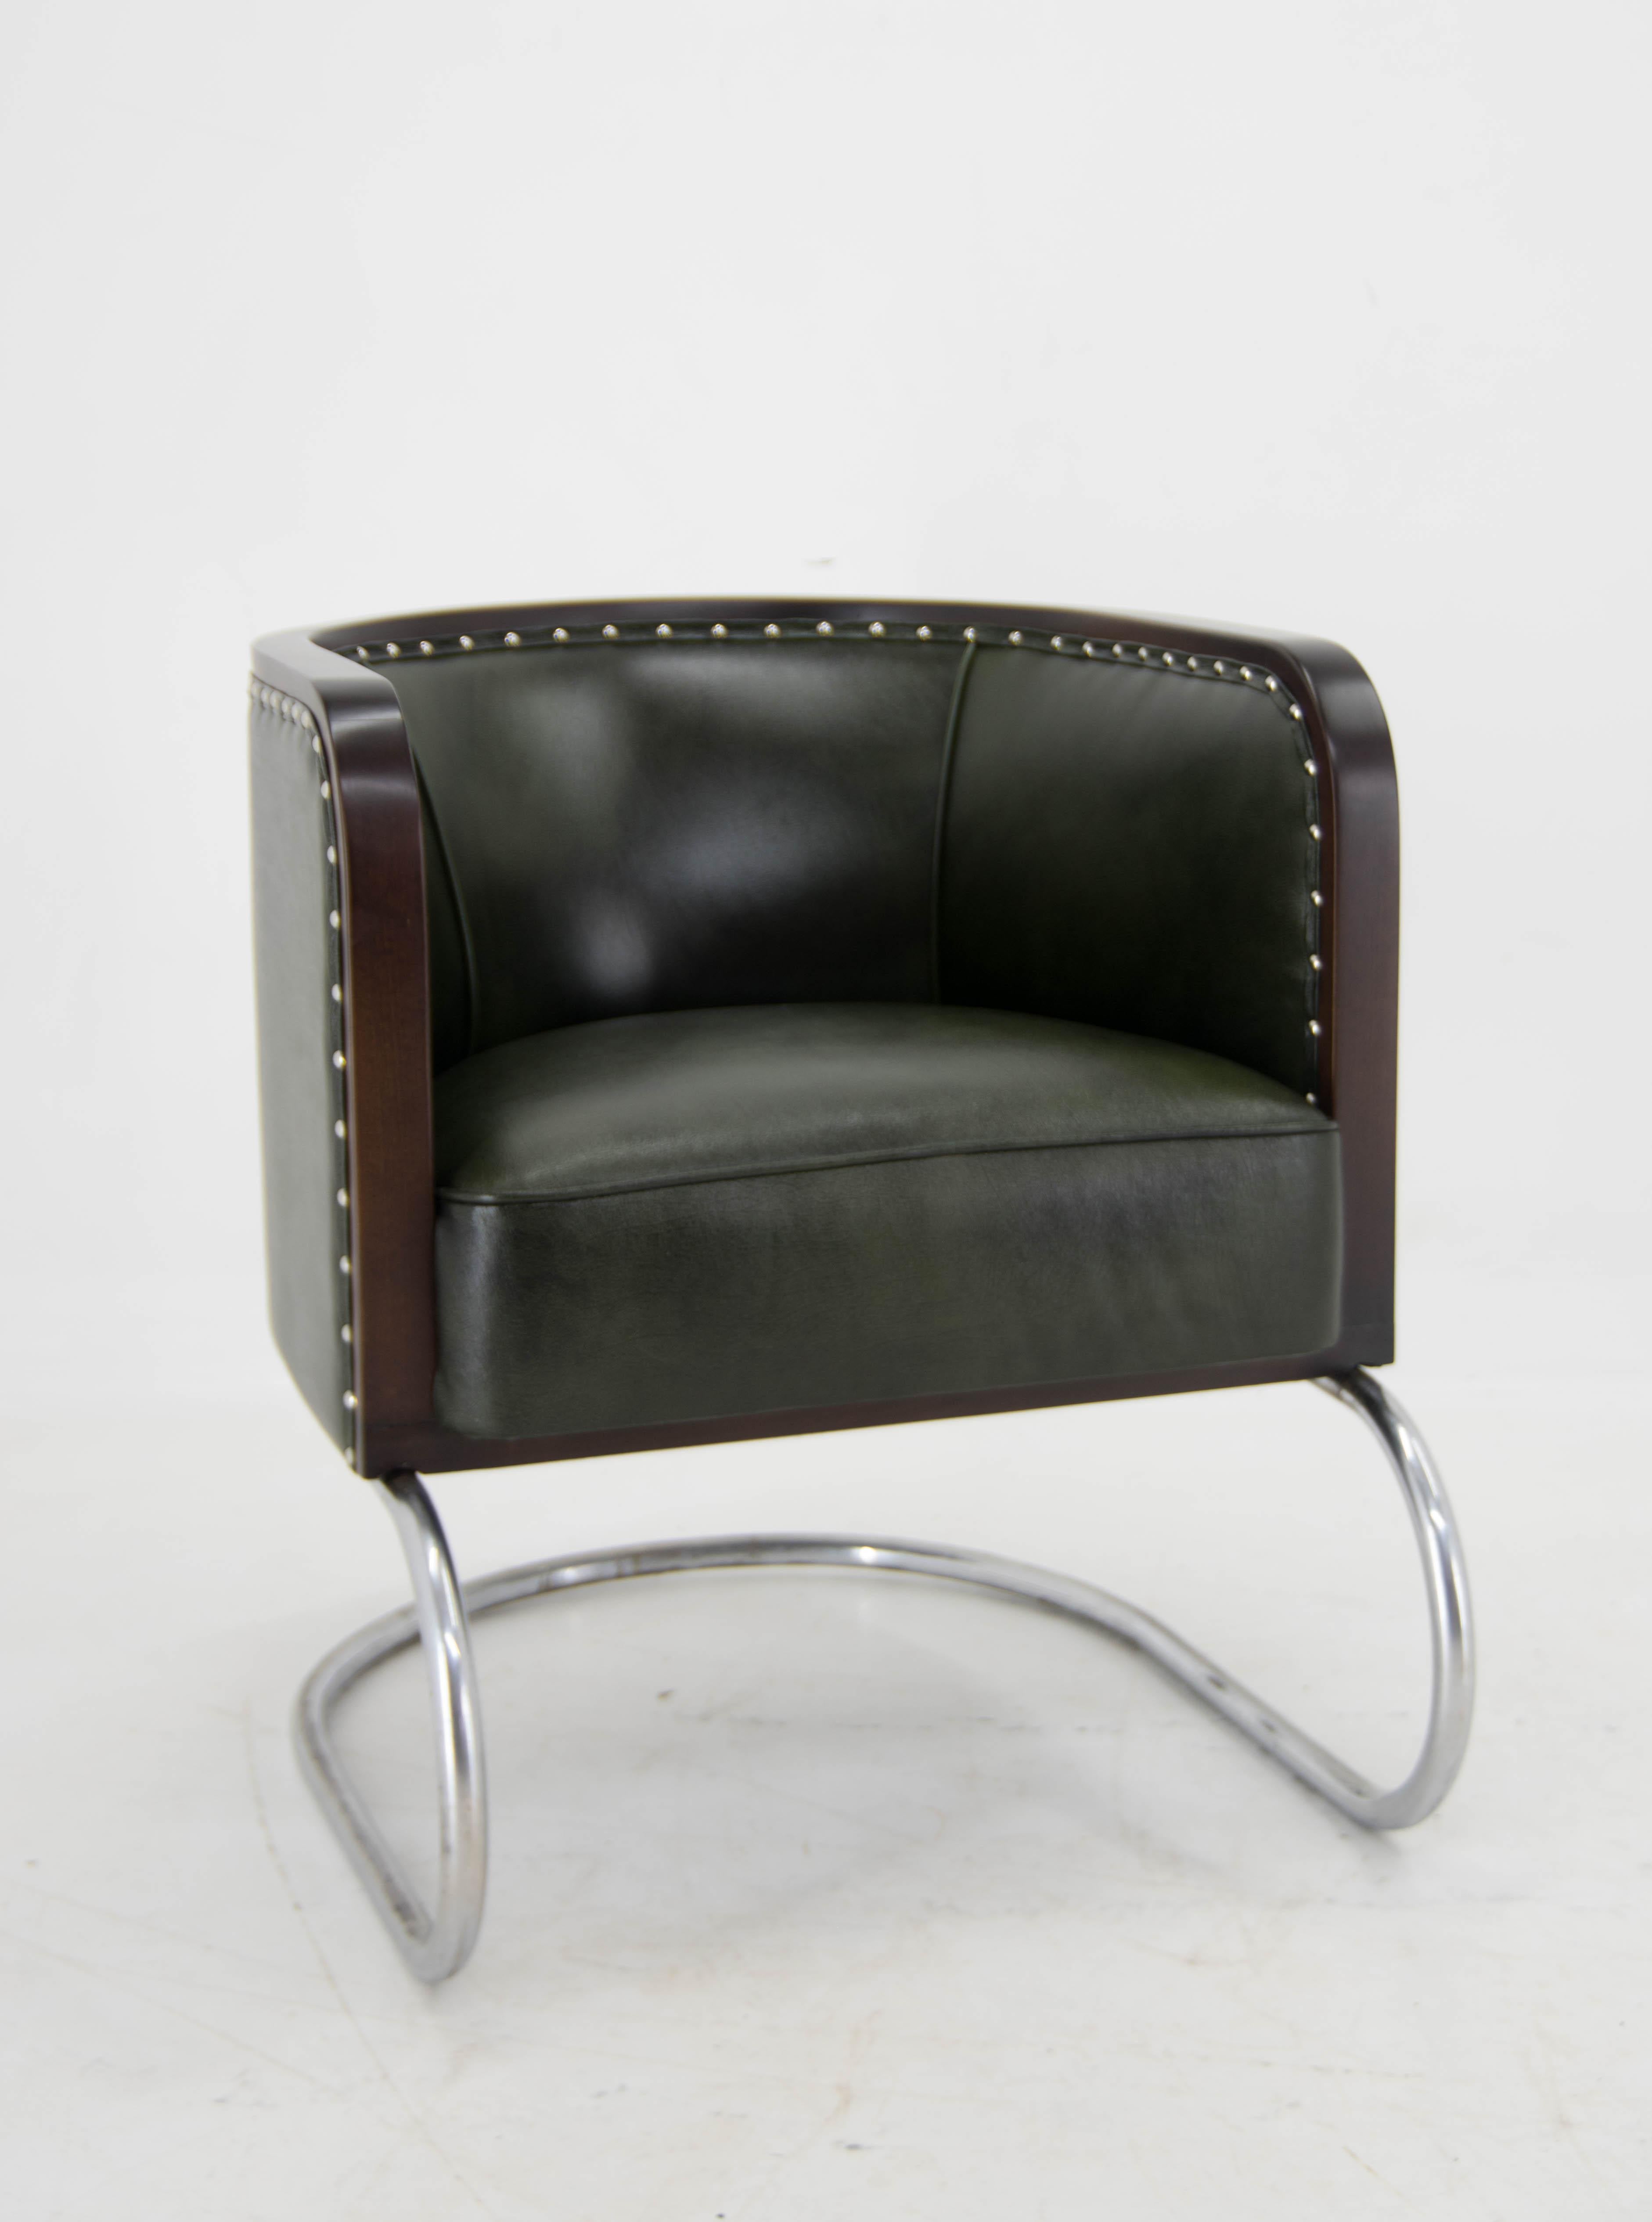 Bauhaus Tubular Armchair in Green Leather, 1920s, Restored For Sale 1